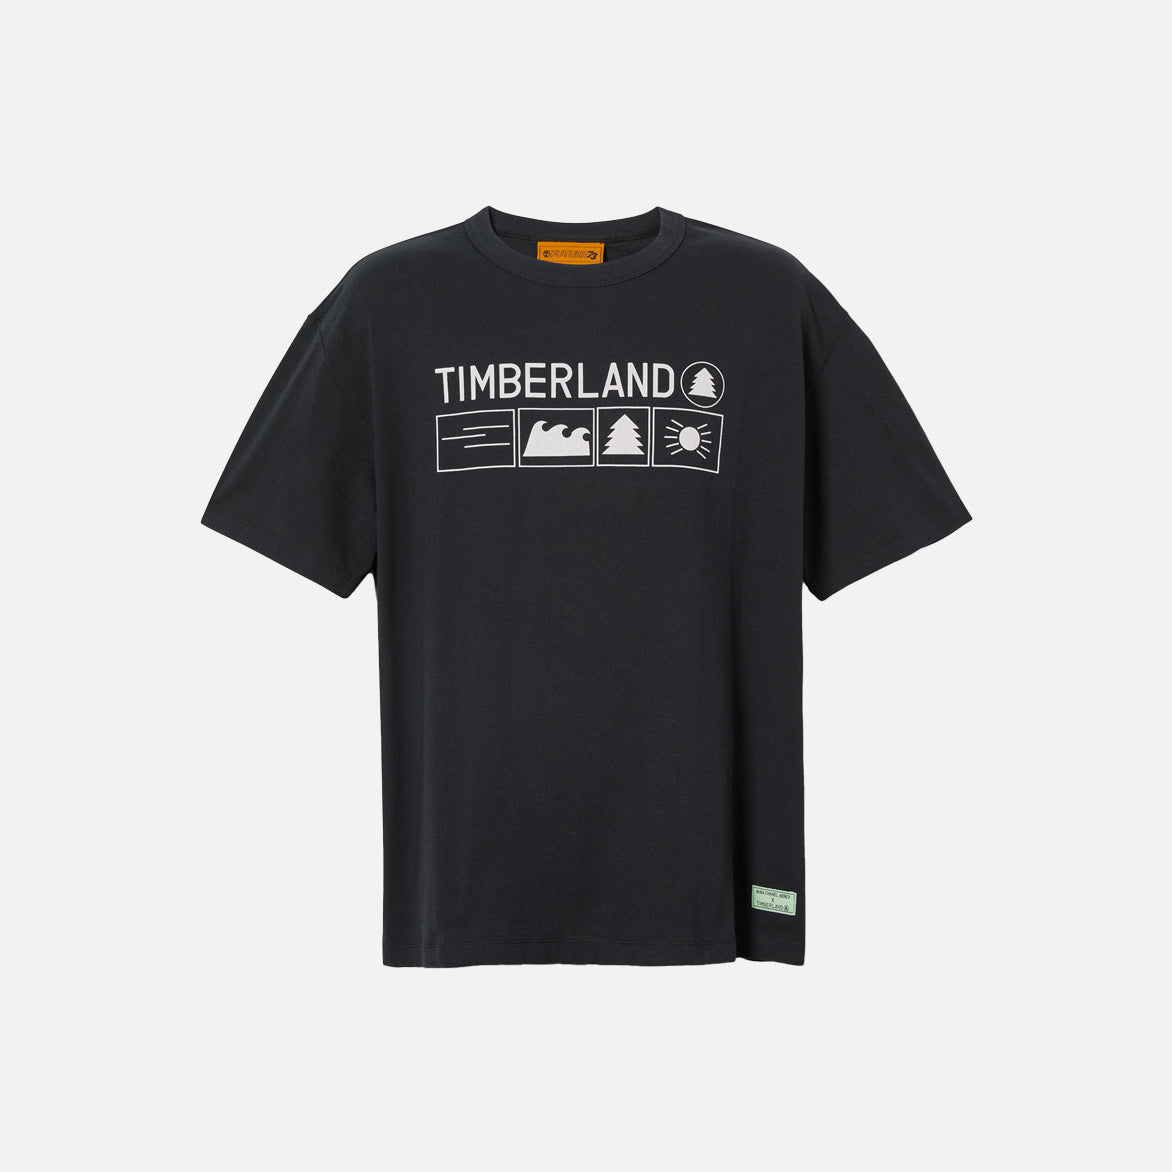 Timberland® x Nina Chanel Abney T-Shirt in White